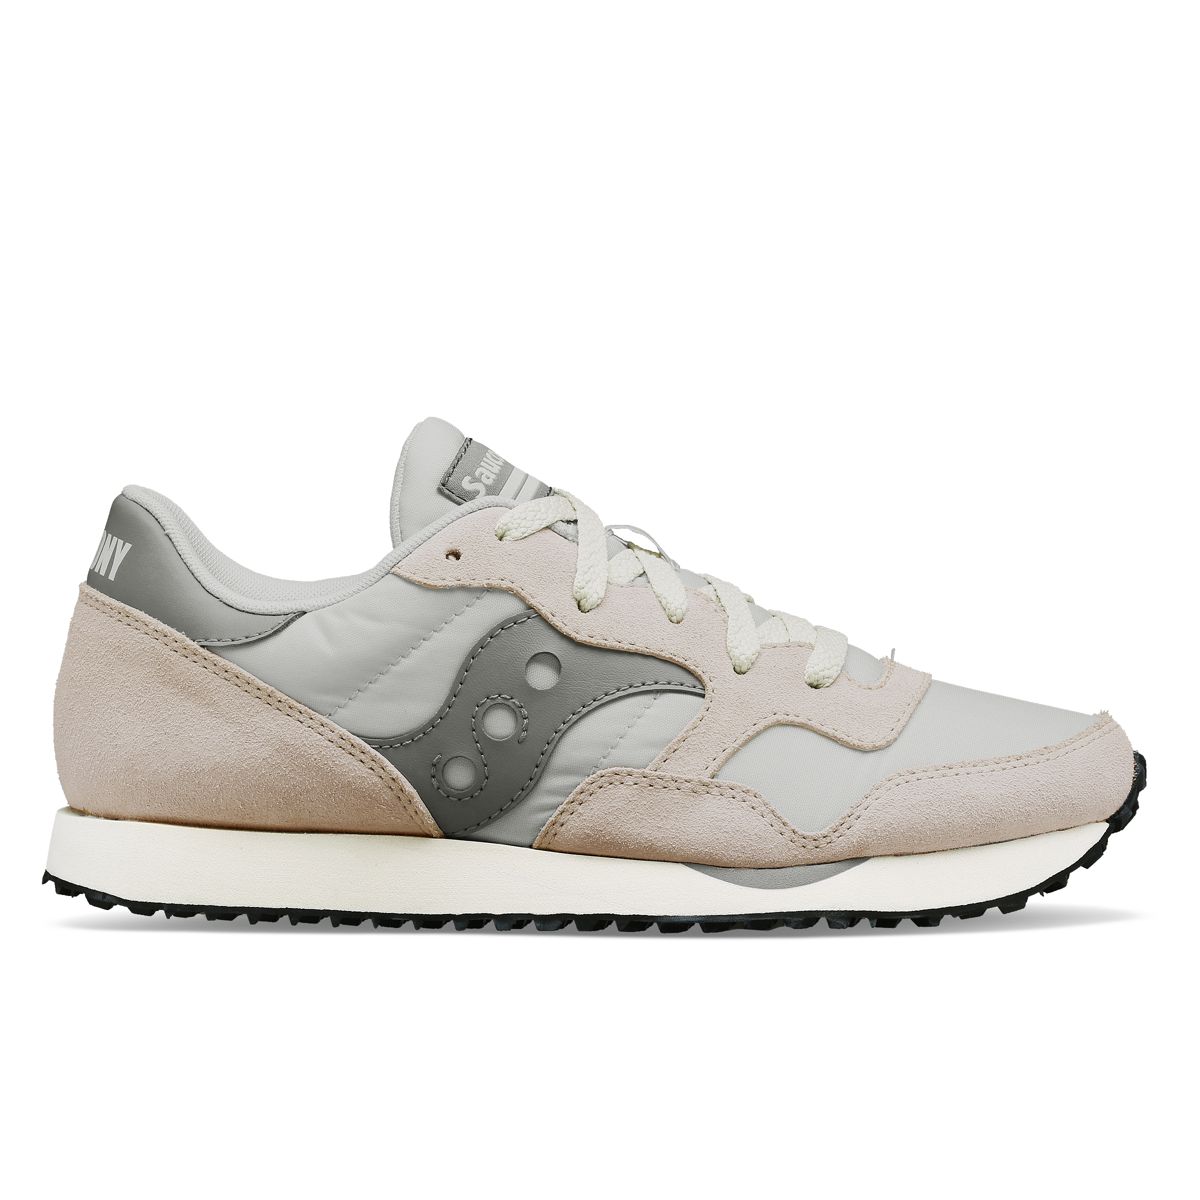 Women's DXN Trainer - Lifestyle | Saucony